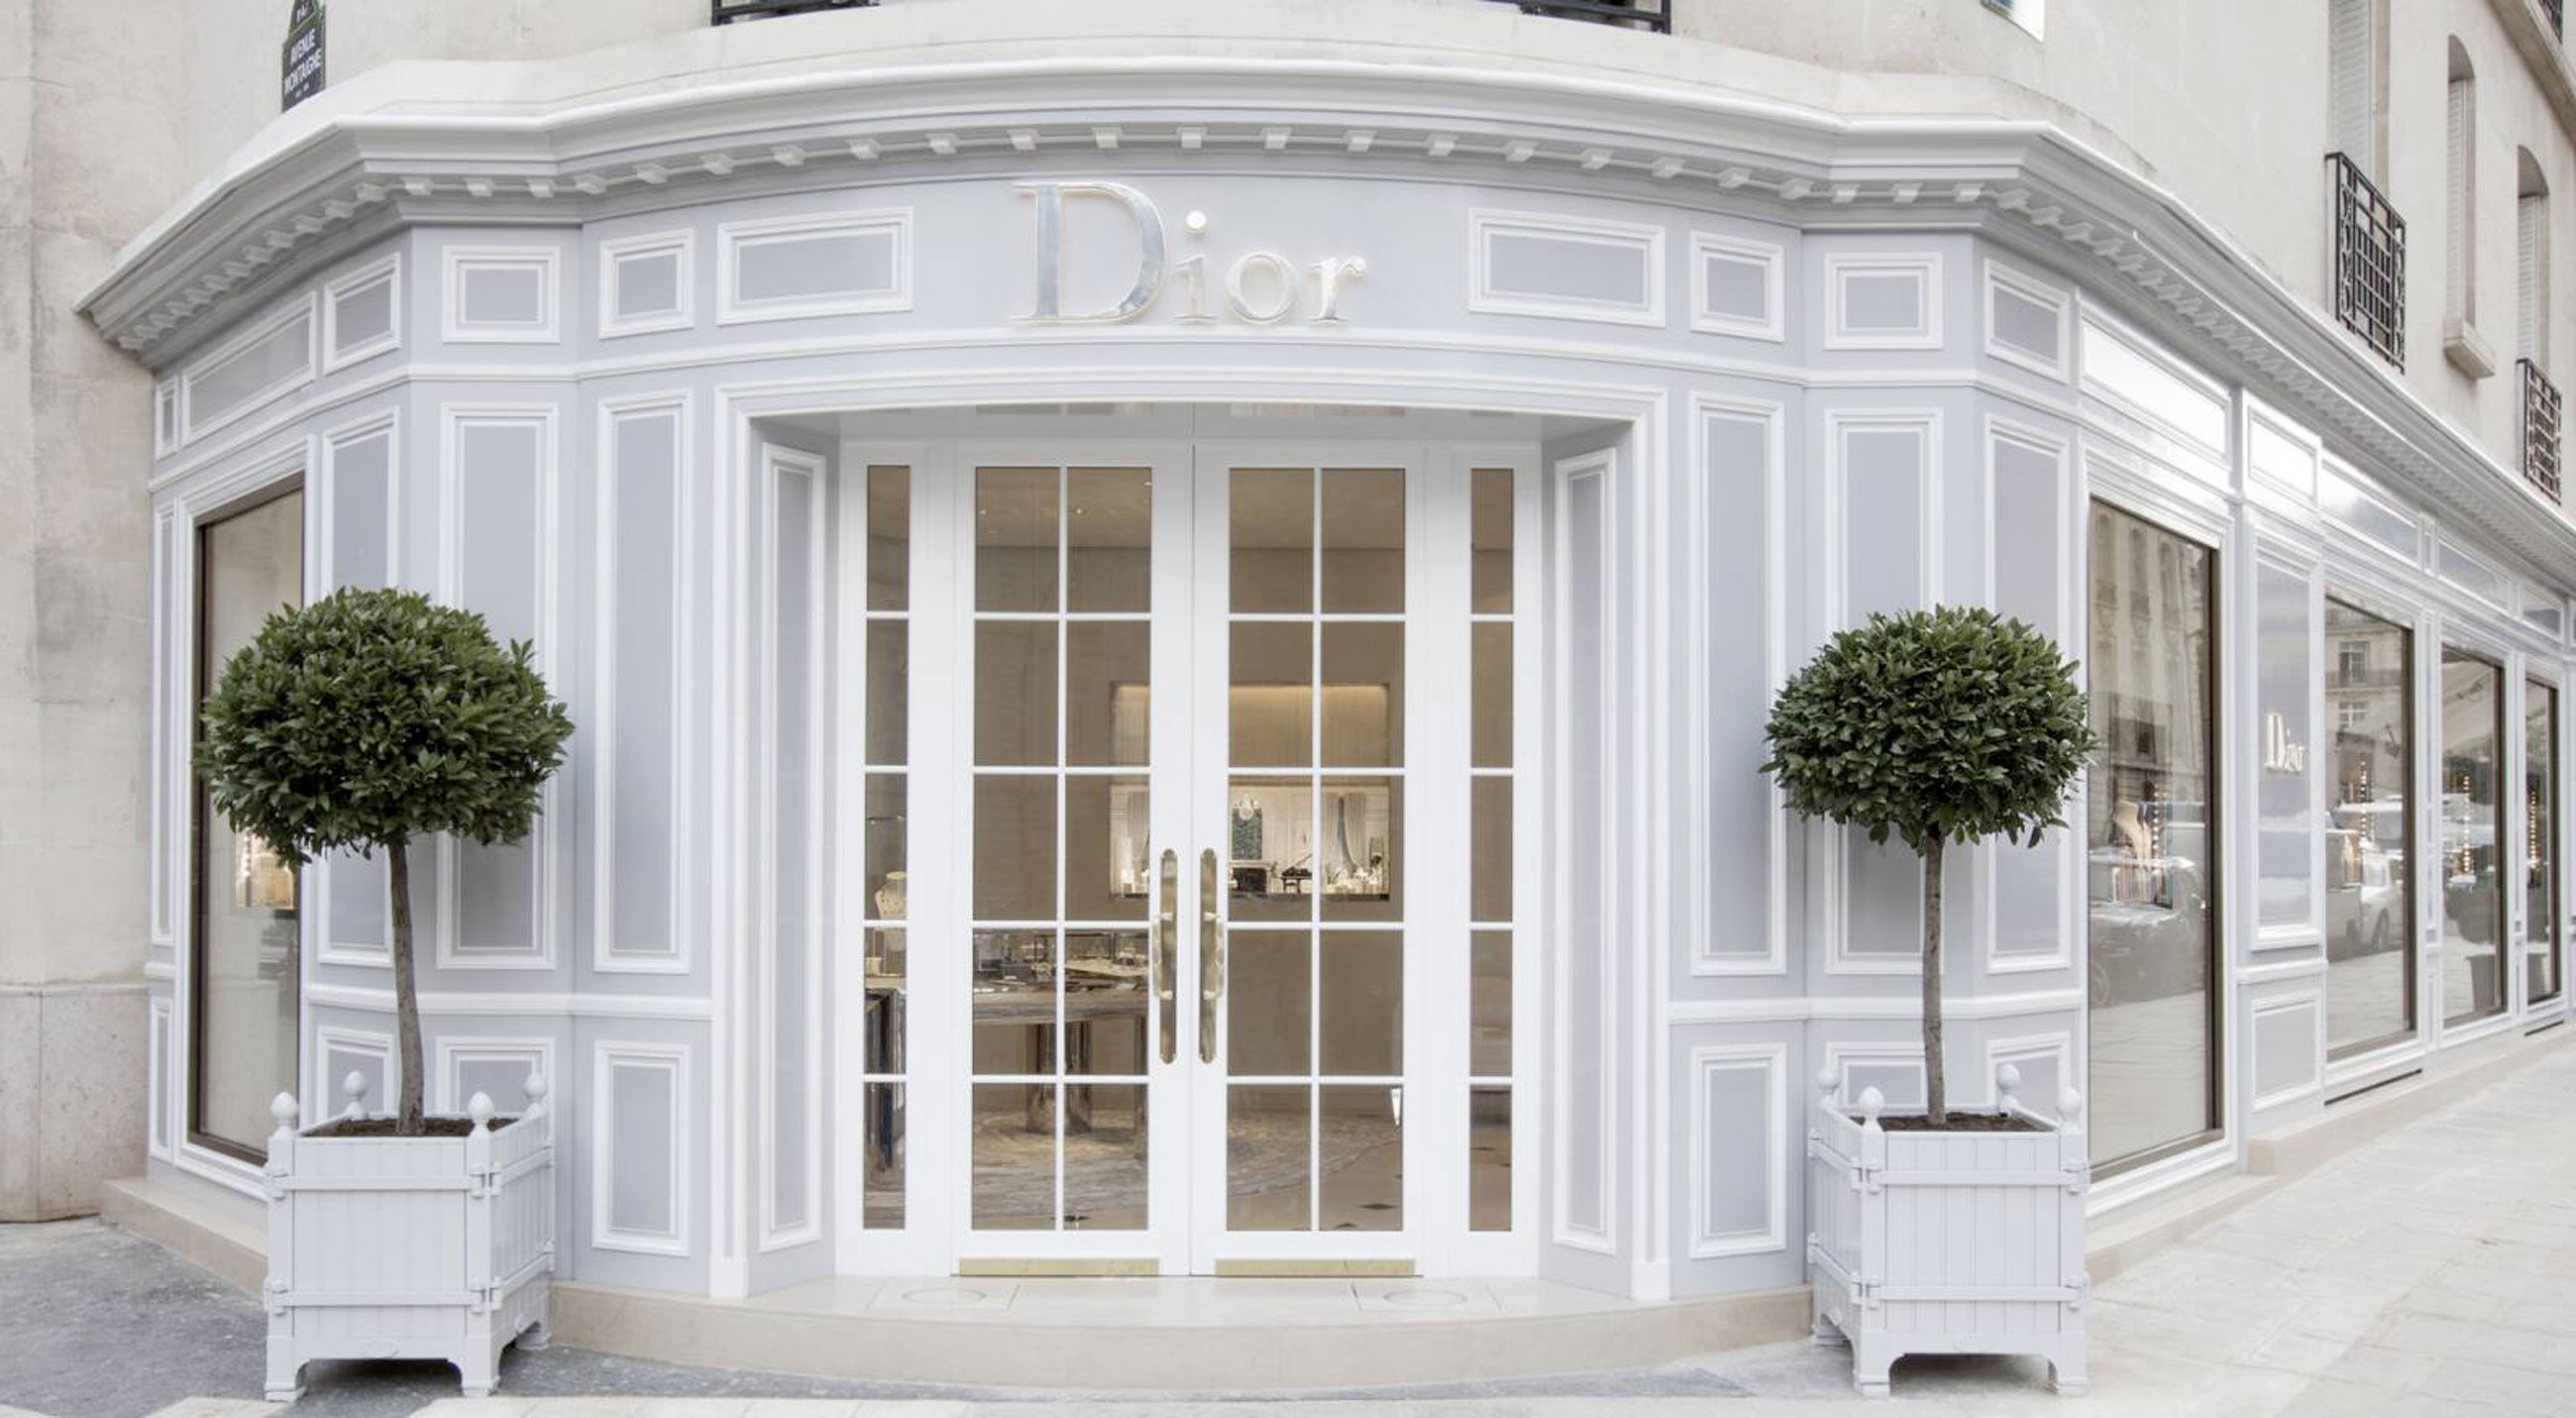 Dior is opening a pop-up shop on the Champs-Elysées